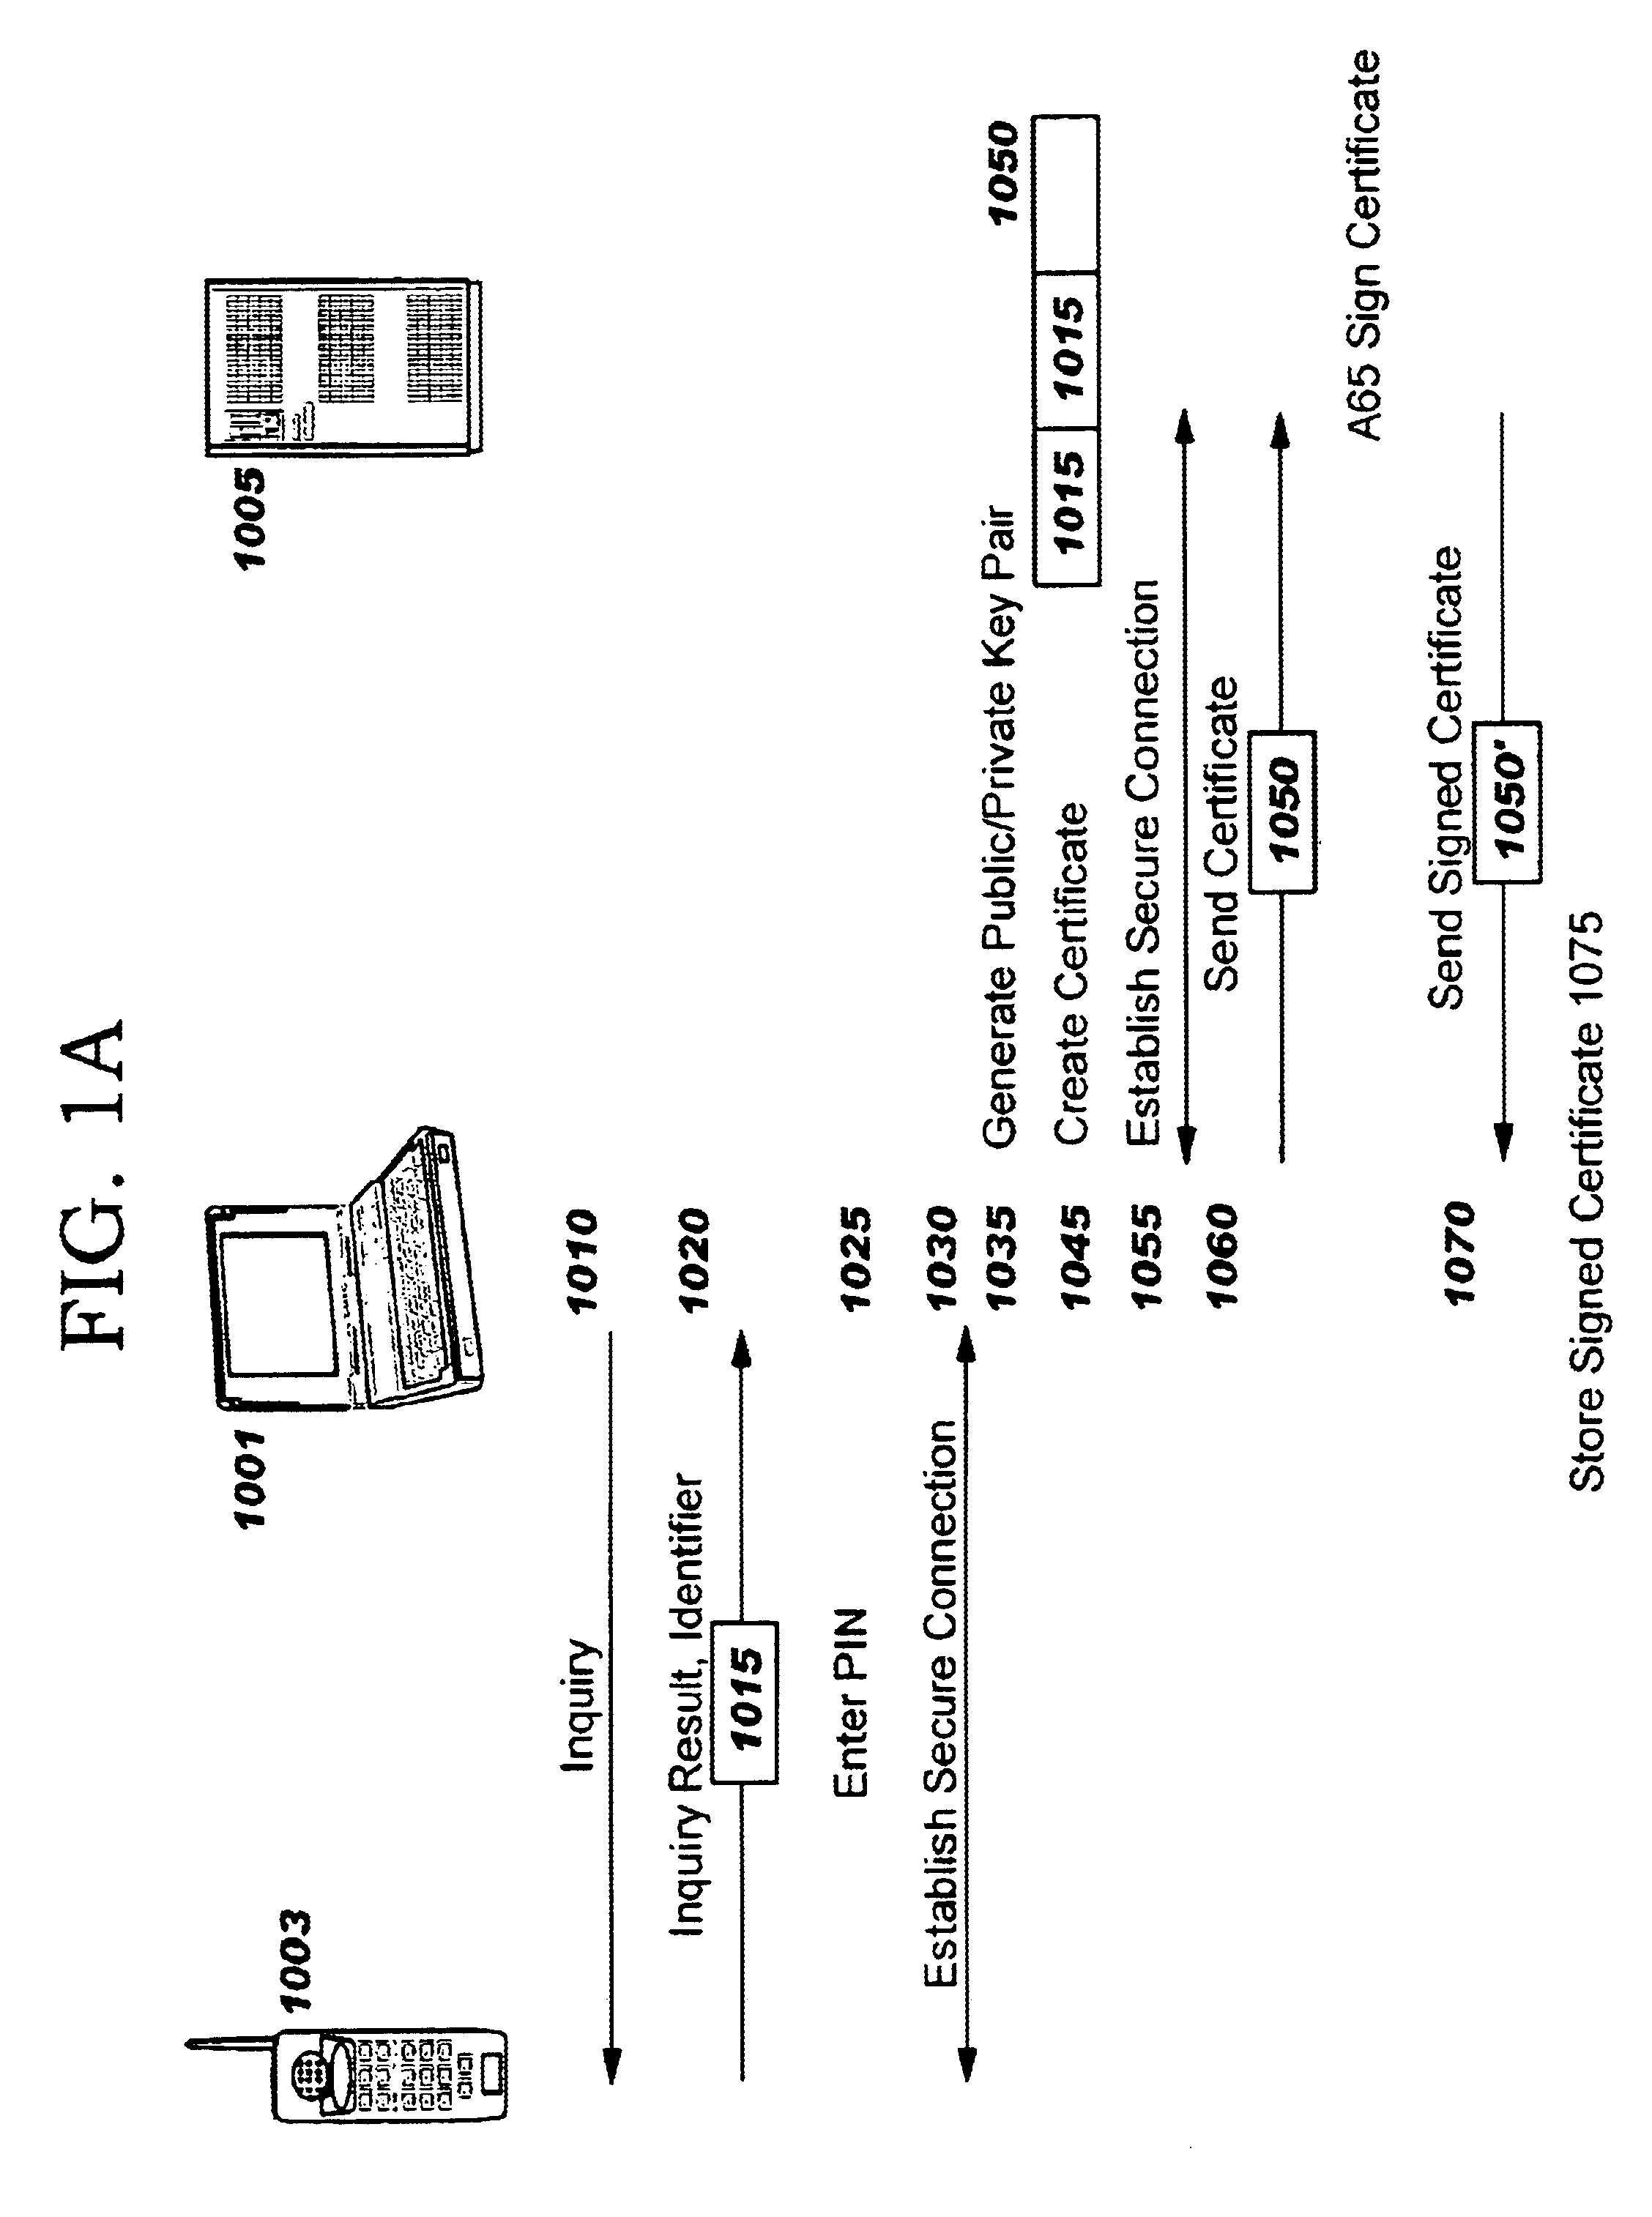 Method and apparatus for efficiently initializing secure communications among wireless devices